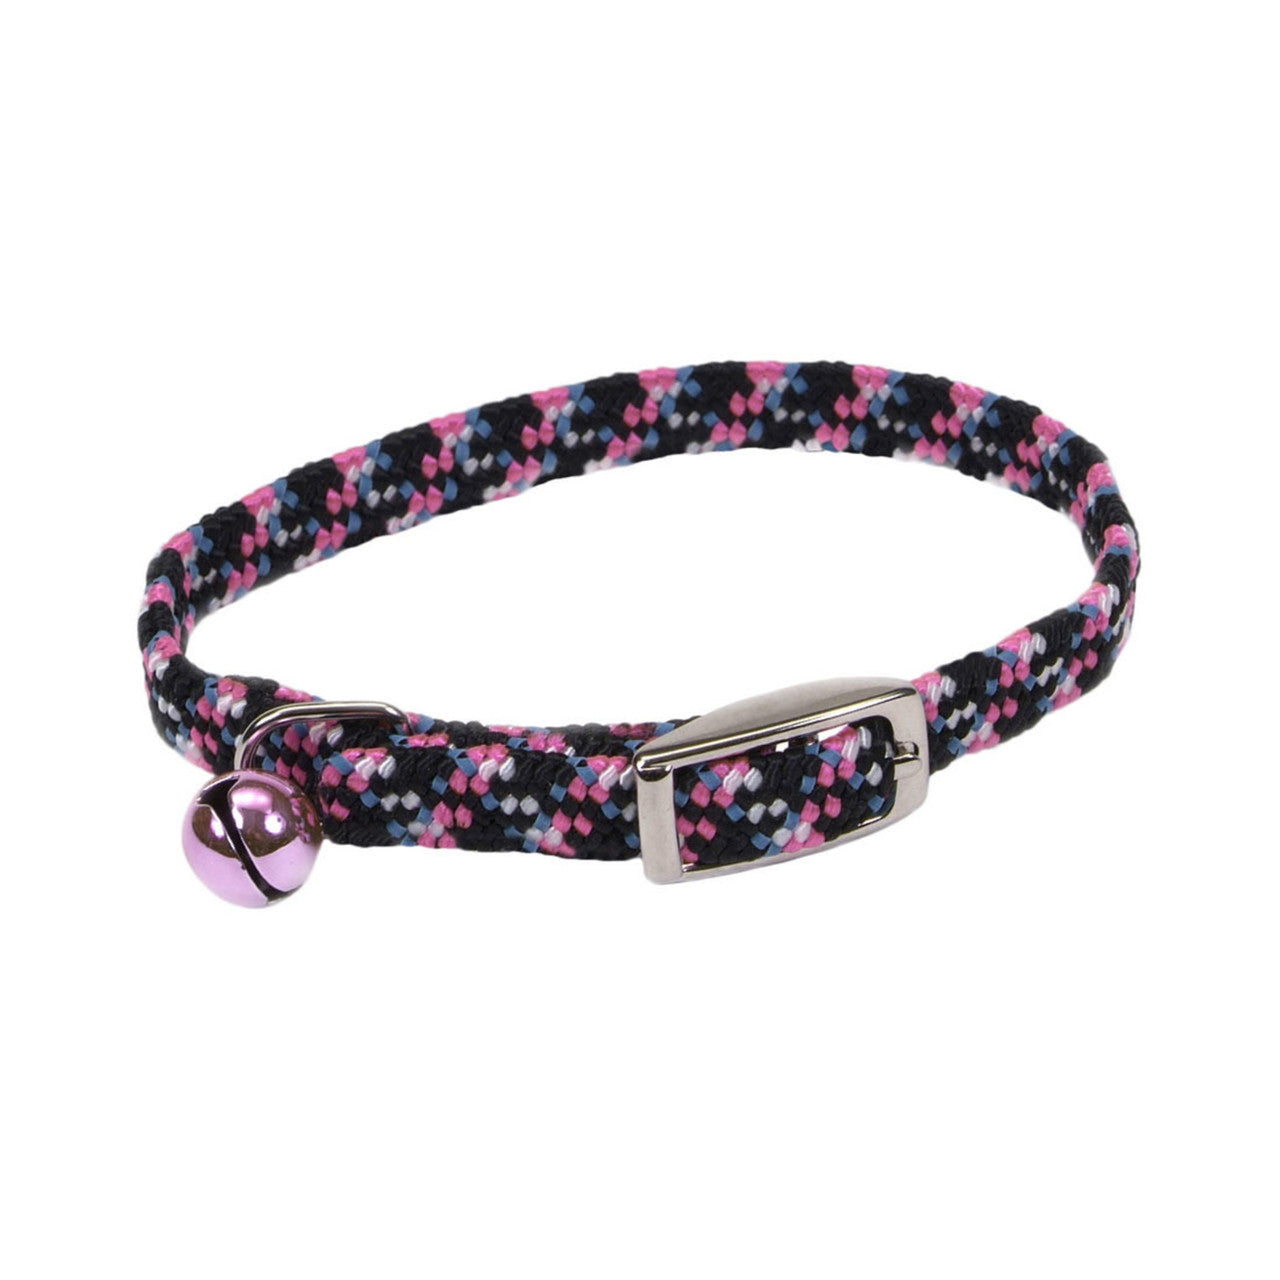 Lil Pals Elasticized Safety Kitten Collar with Reflective Threads Neon Pink 3/8 in x 8 in